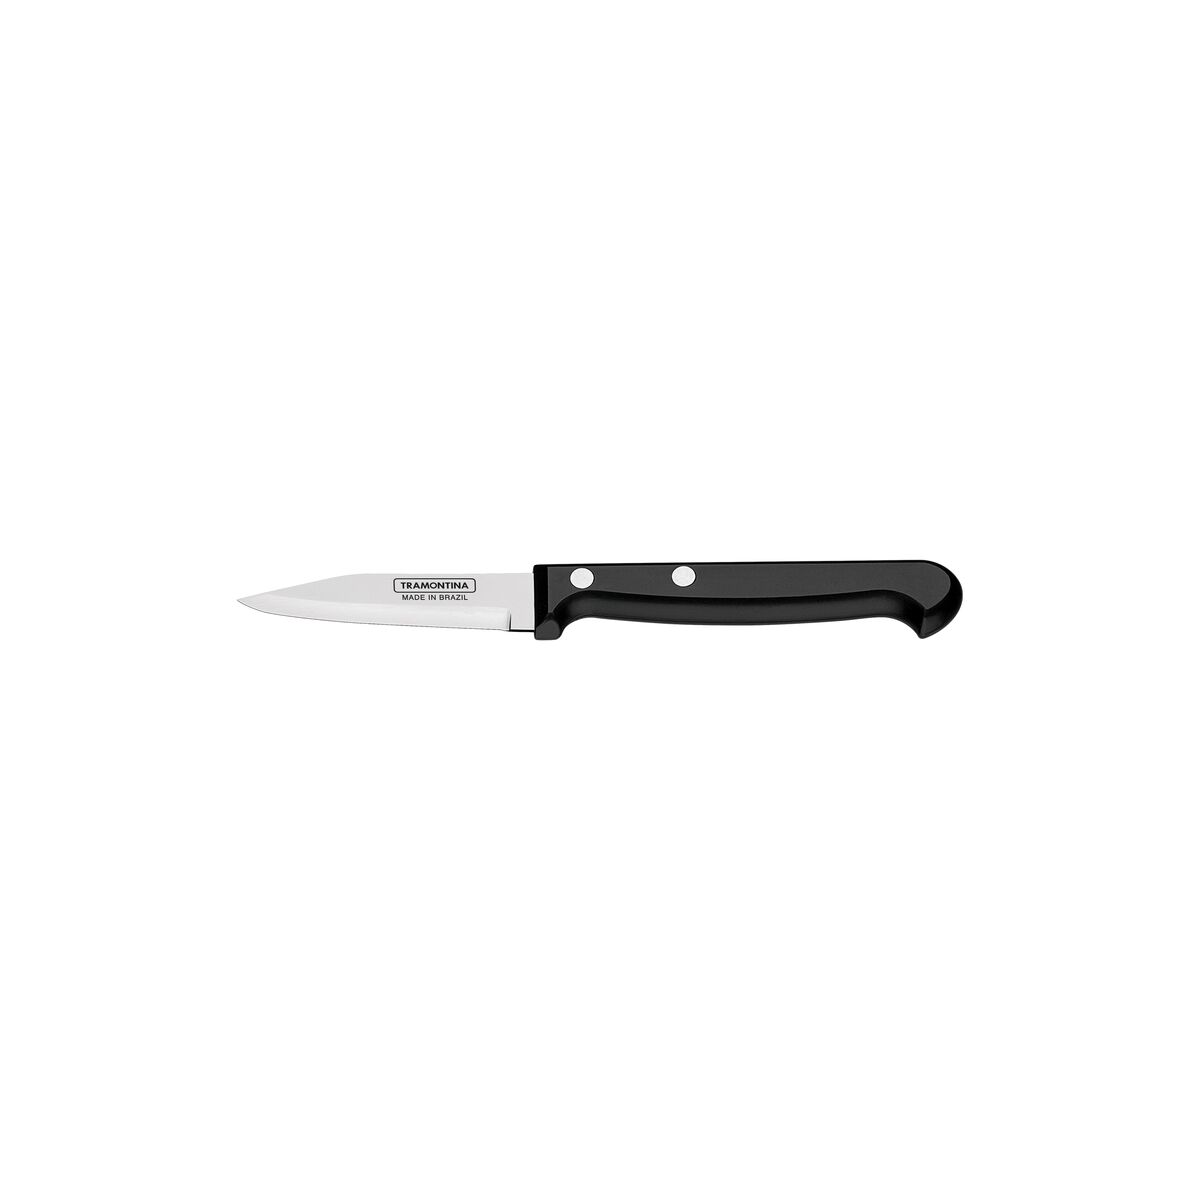 Tramontina Ultracorte 3" Vegetable and Fruit Knife with Stainless Steel Blade and Black Polypropylene Handle